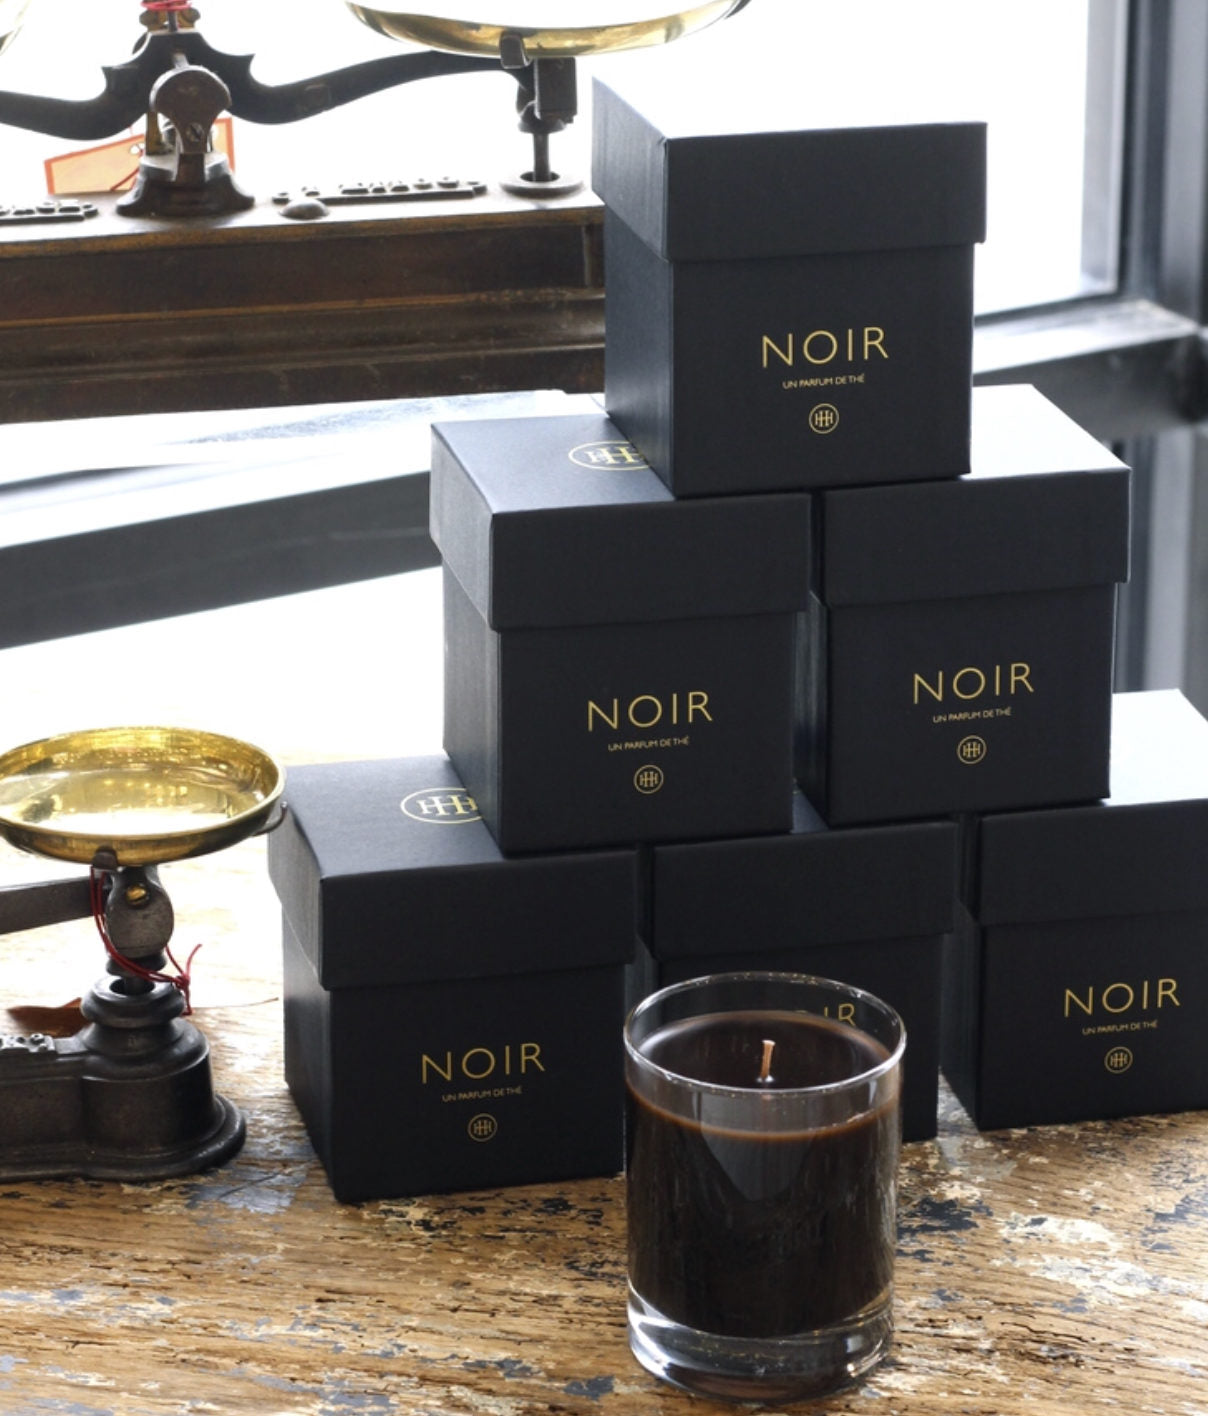 The Noir scent is the same as the Blanc -- just 20% stronger. We love them both.